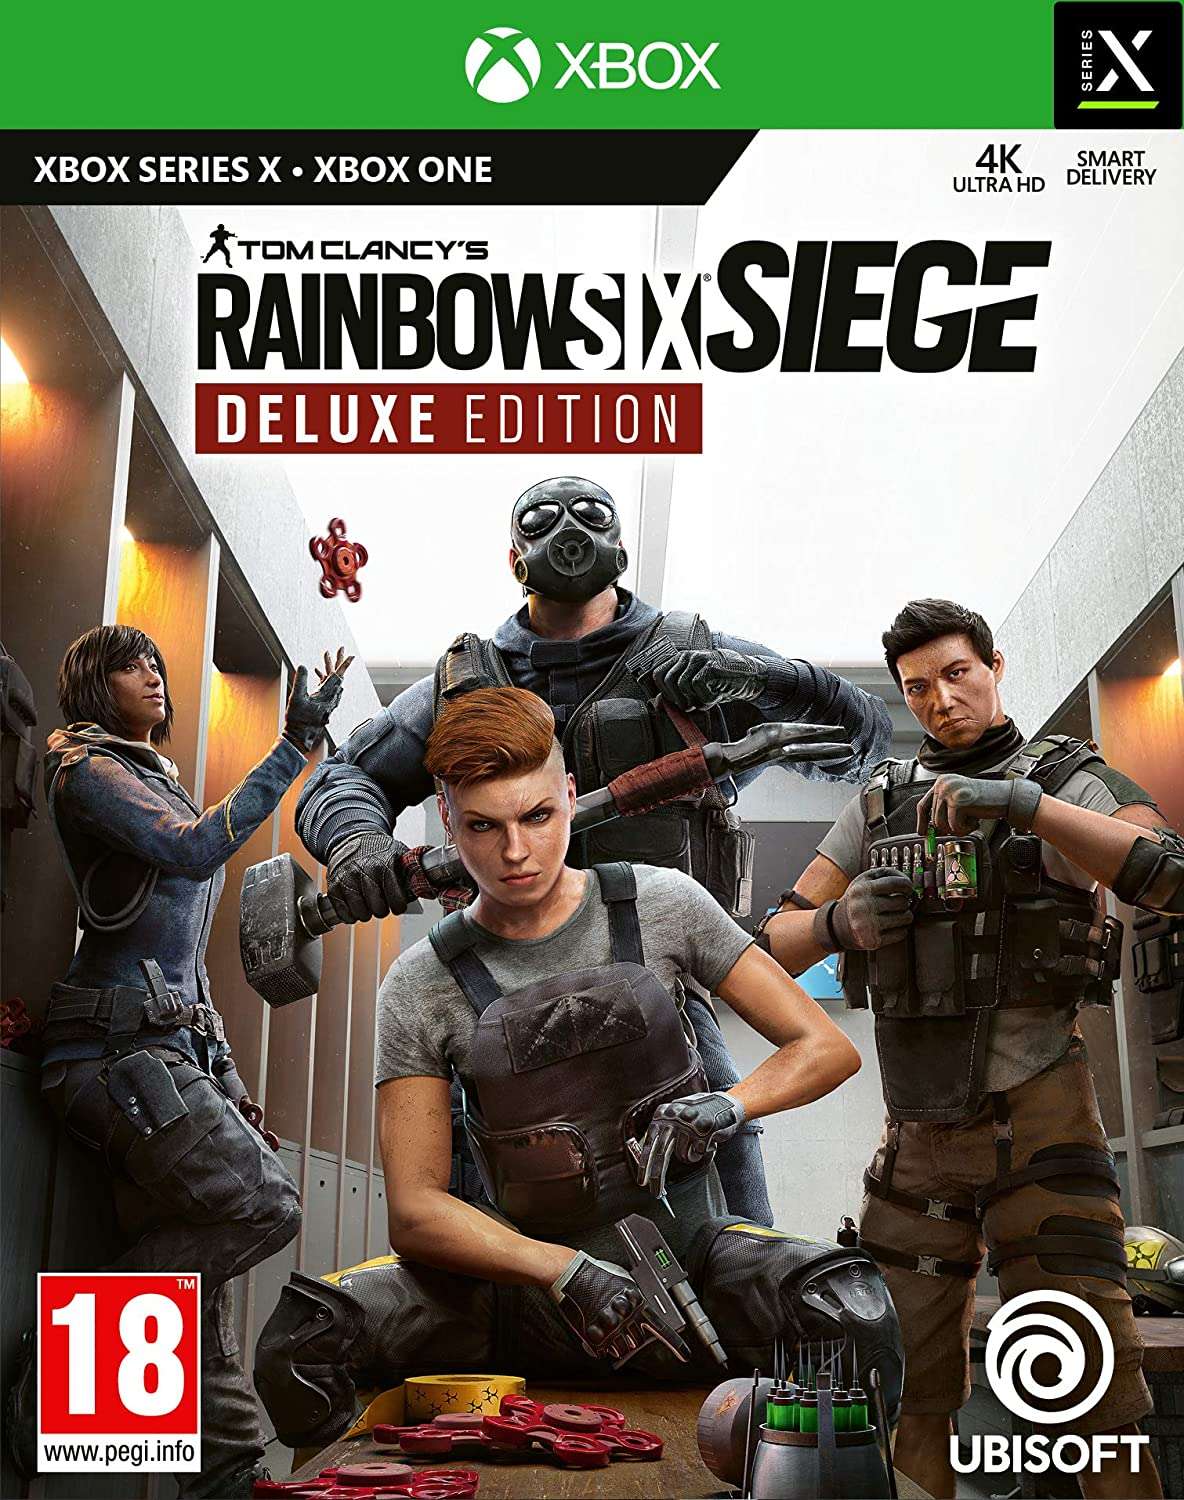 Tom Clancys Rainbow Six Siege Deluxe Edition for XBOXONE to rent